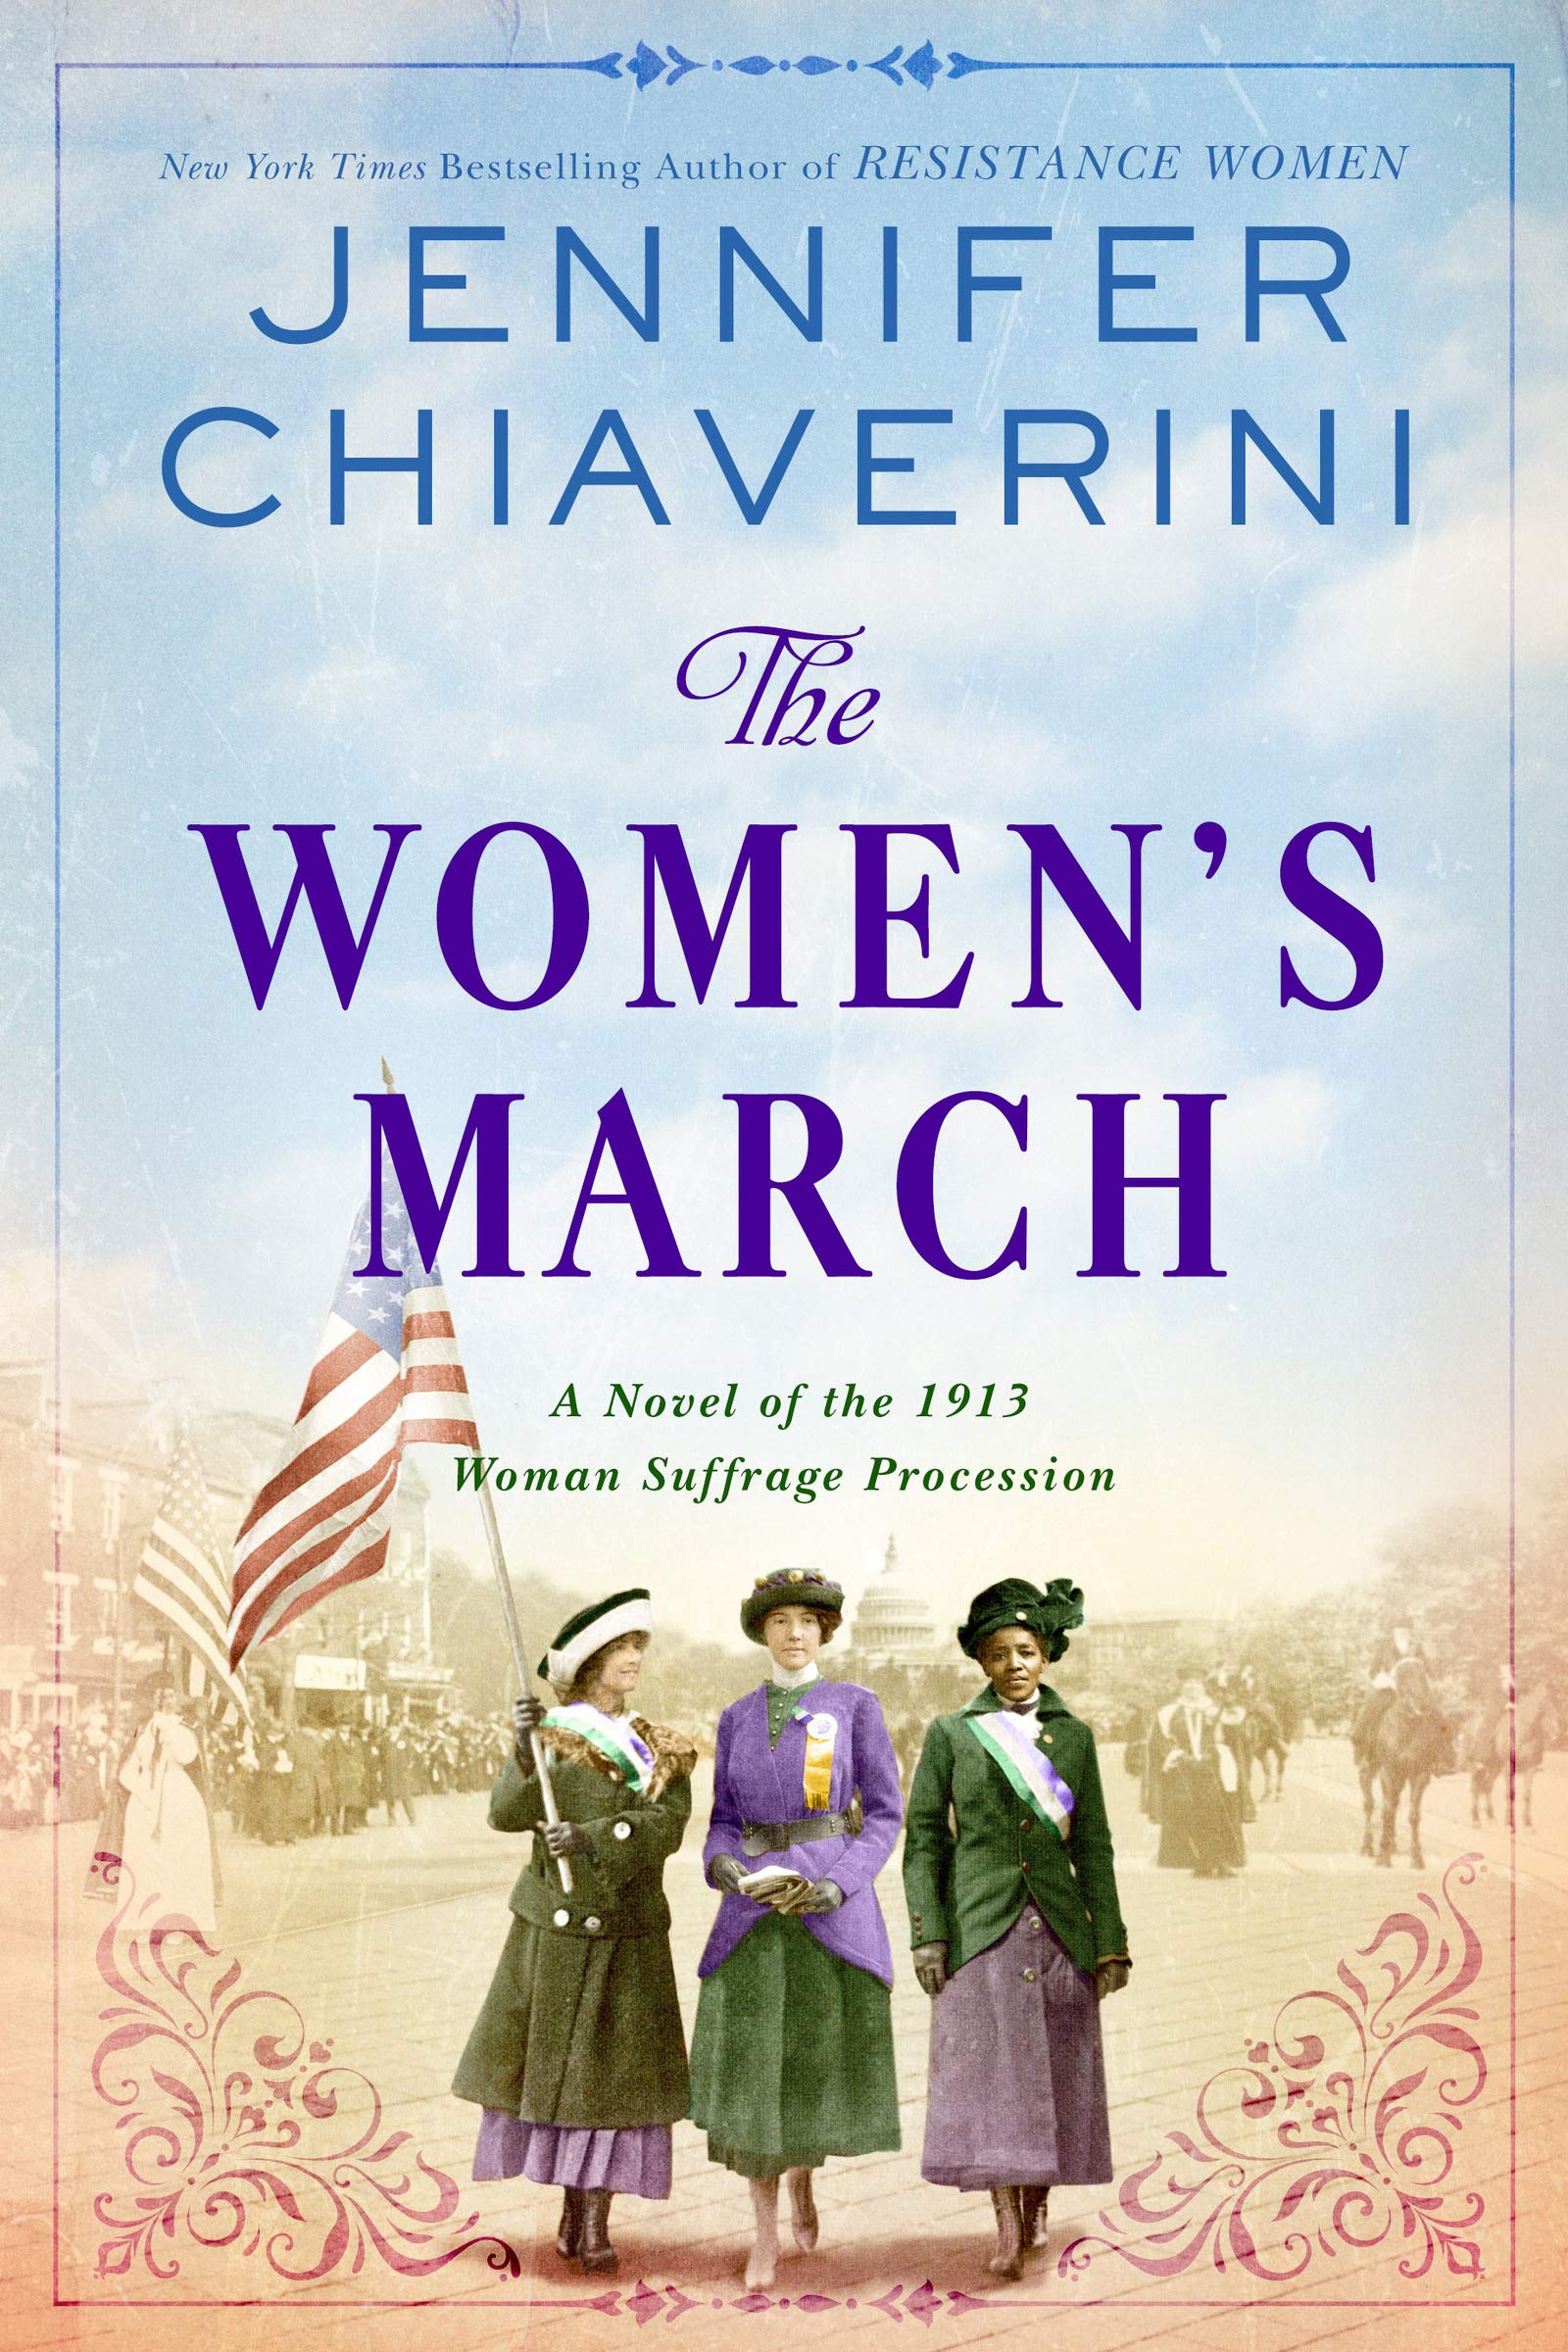 Book Cover: The Women's March, by Jennifer Chiaverini